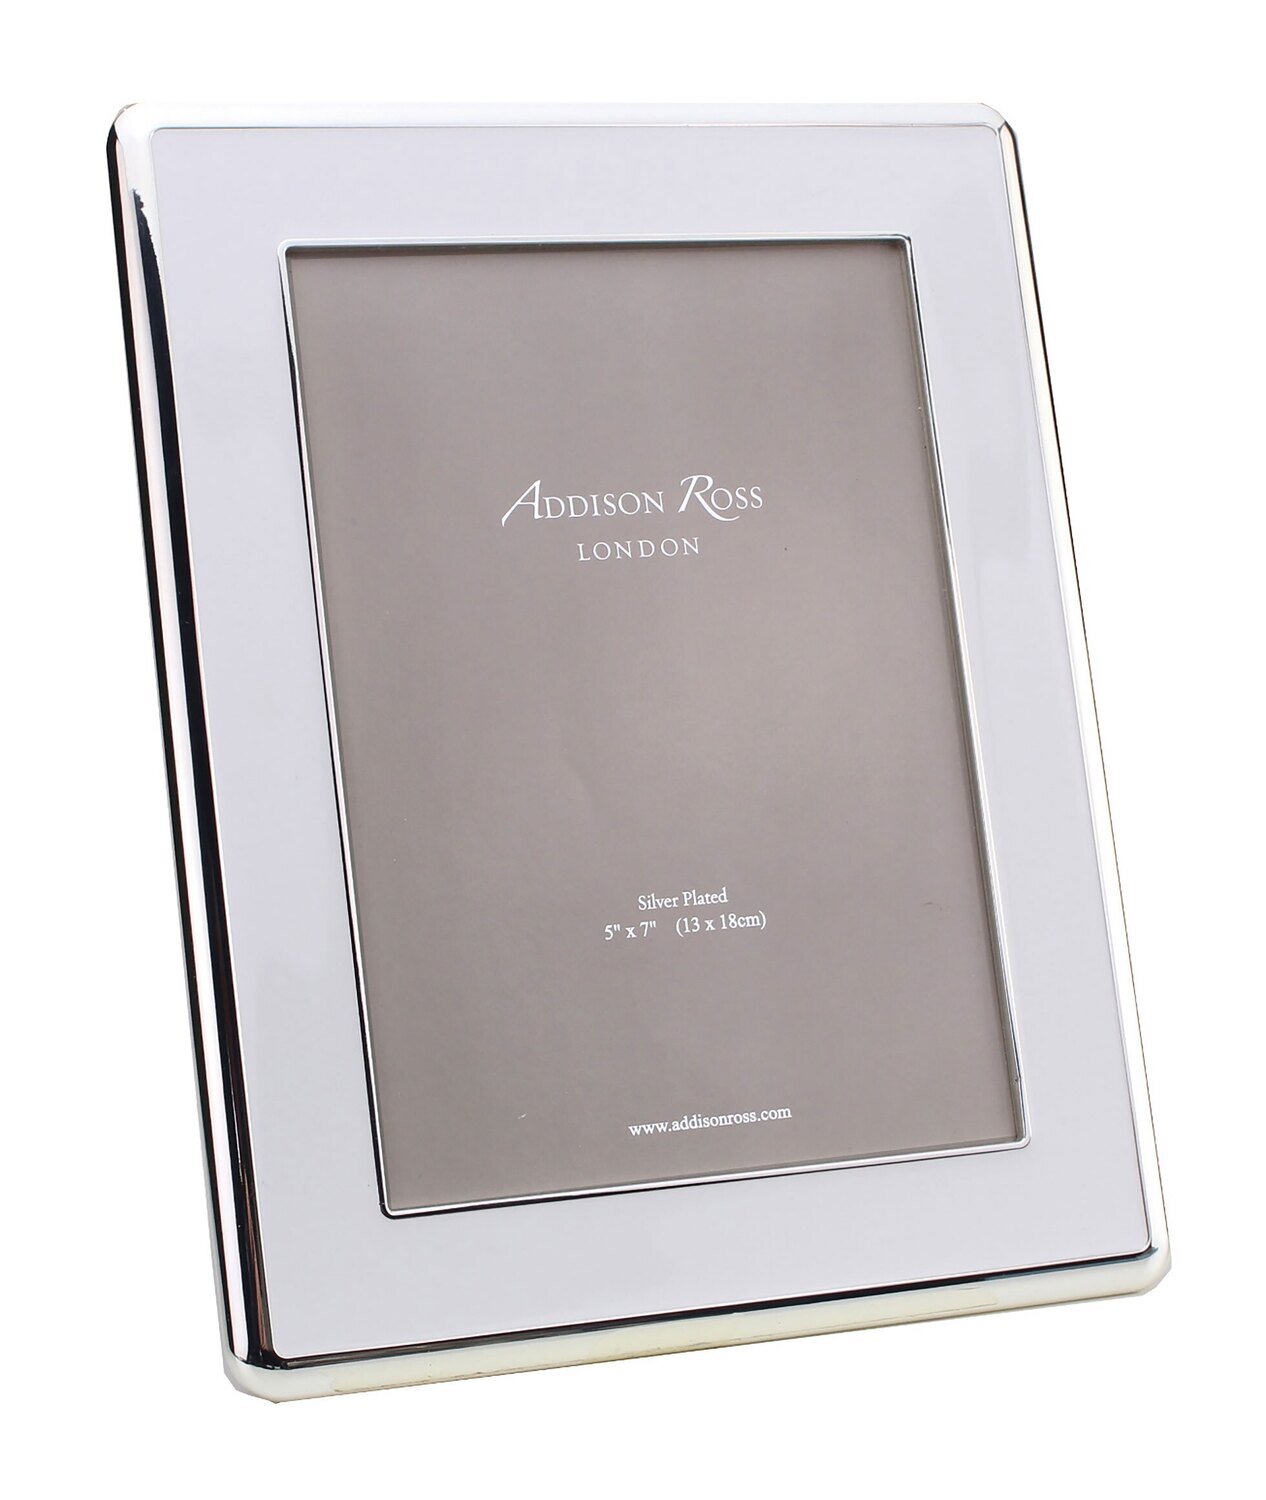 Addison Ross Wide Curved Enamel Picture Frame White & Silver 8 x 10 Inch Silver-plated FR6100